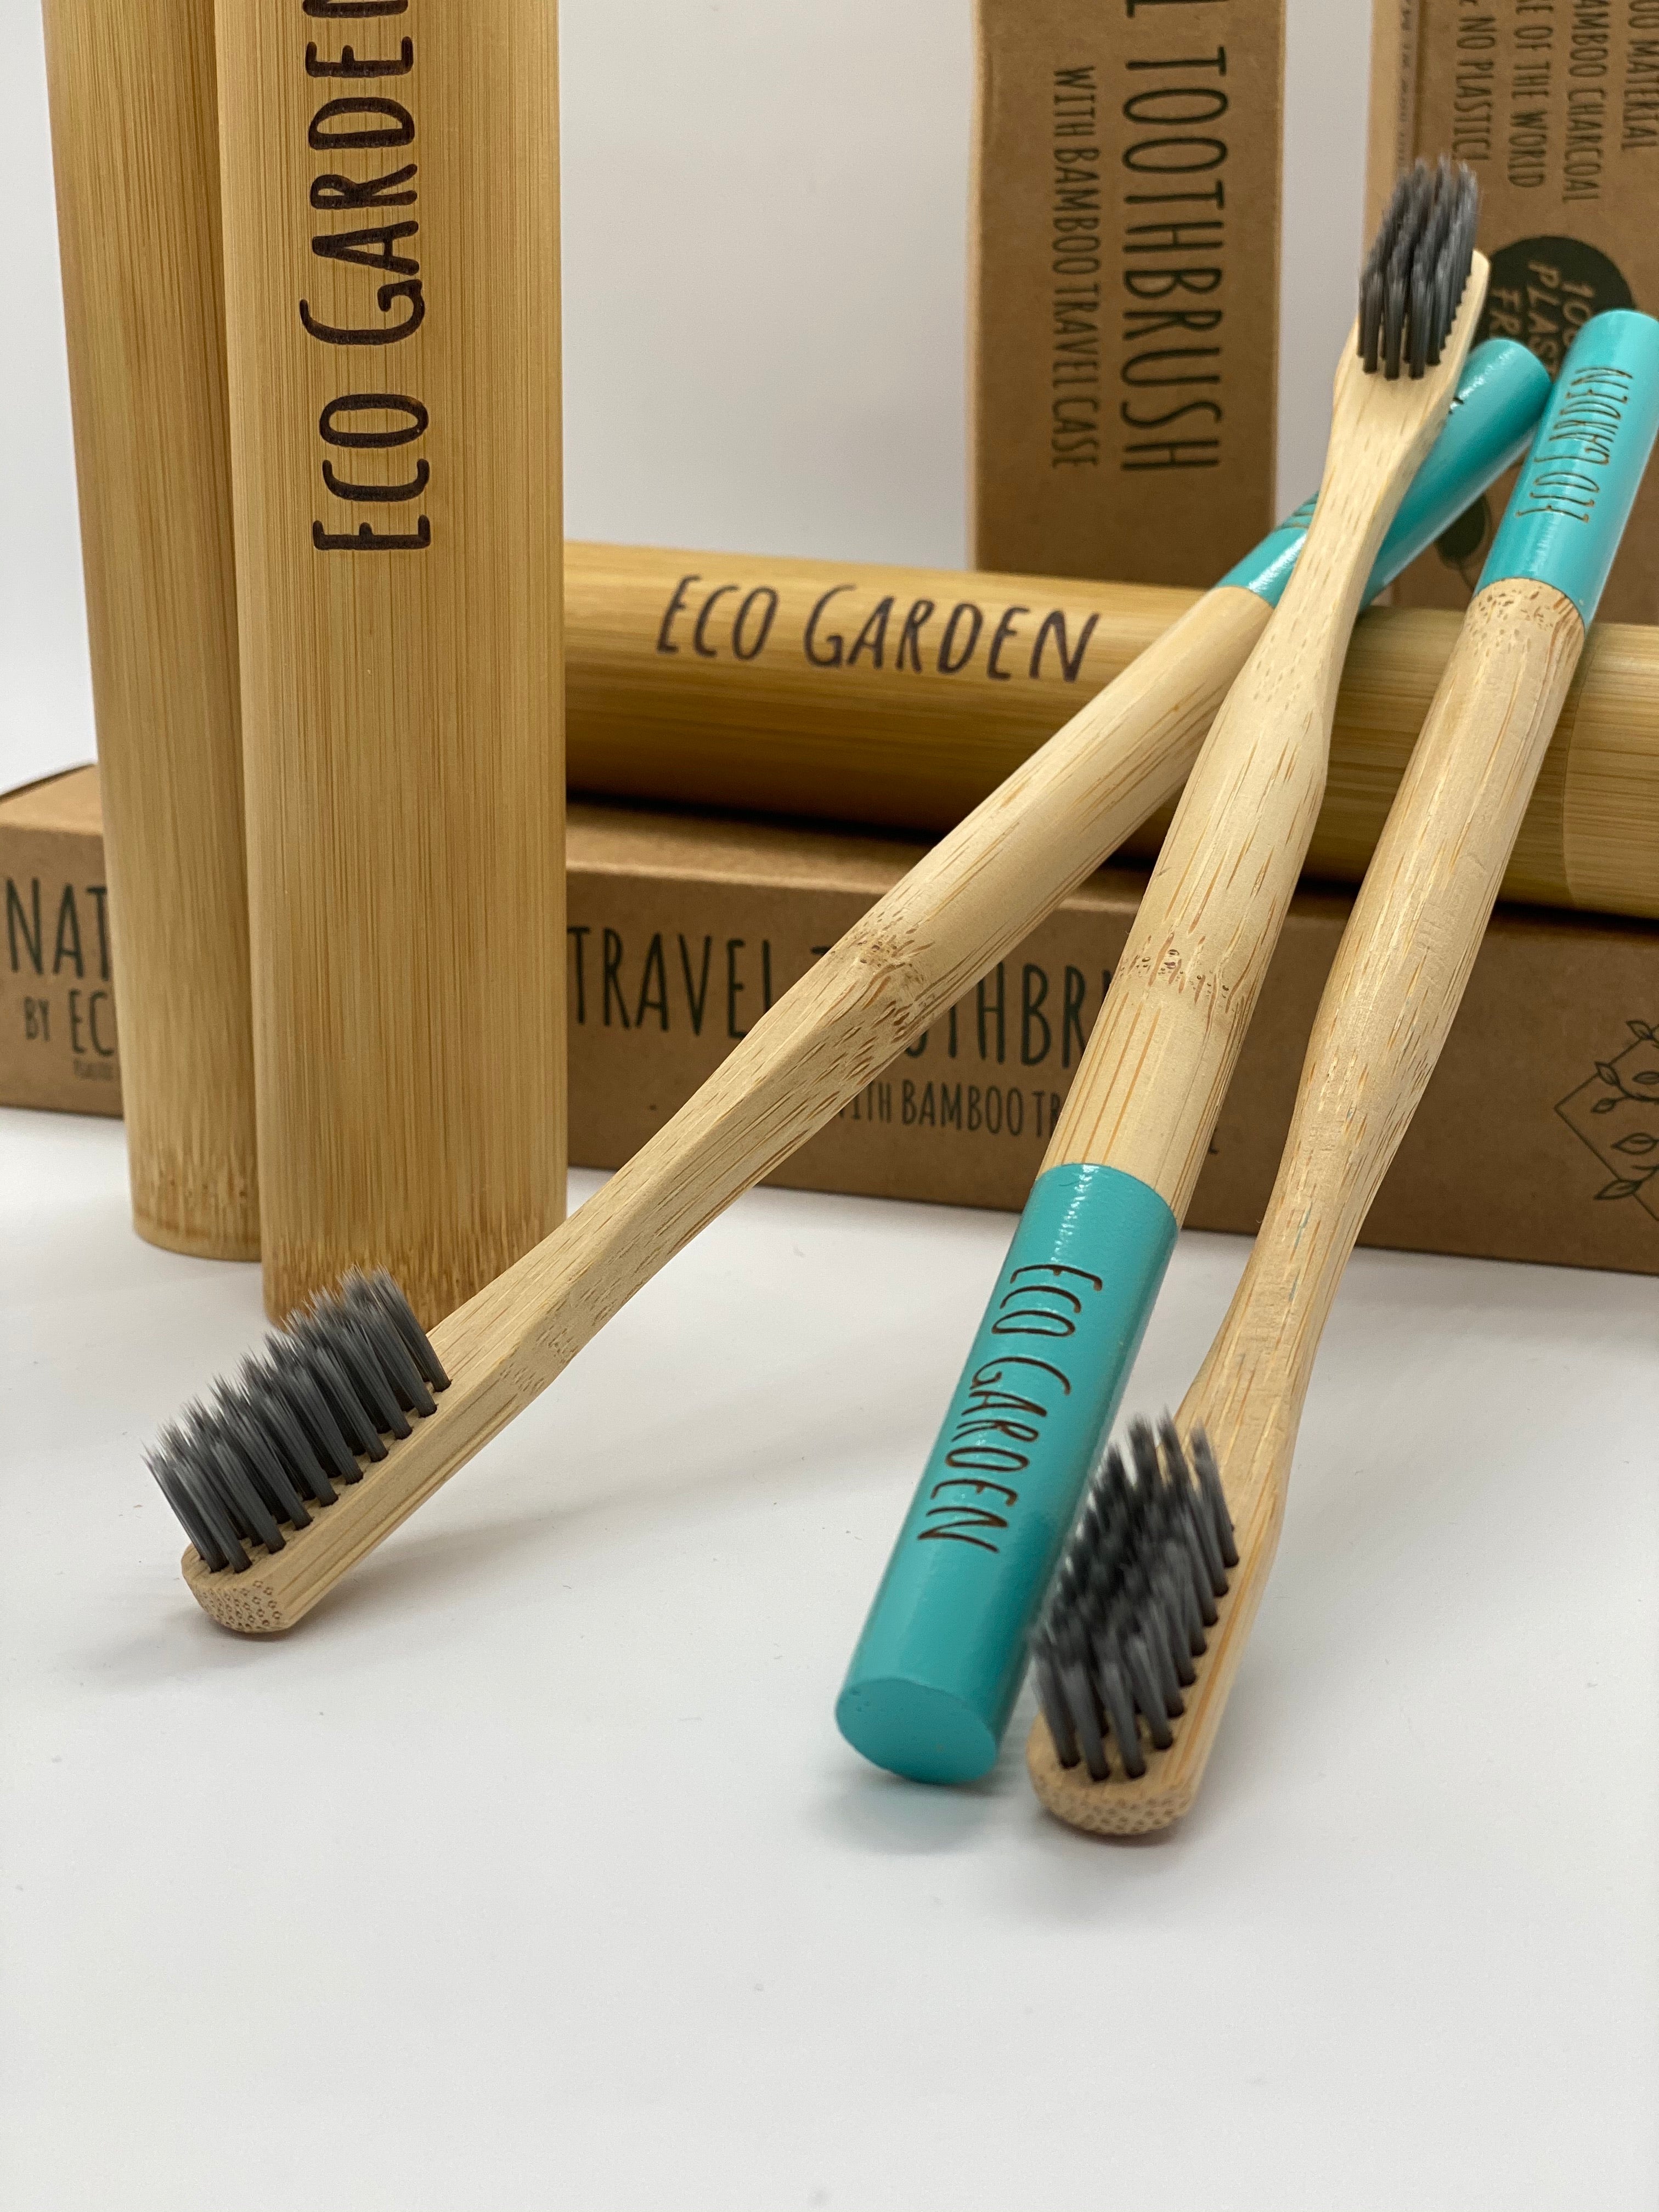 Cerulean Blue Eco Garden Bamboo Travel Toothbrush 